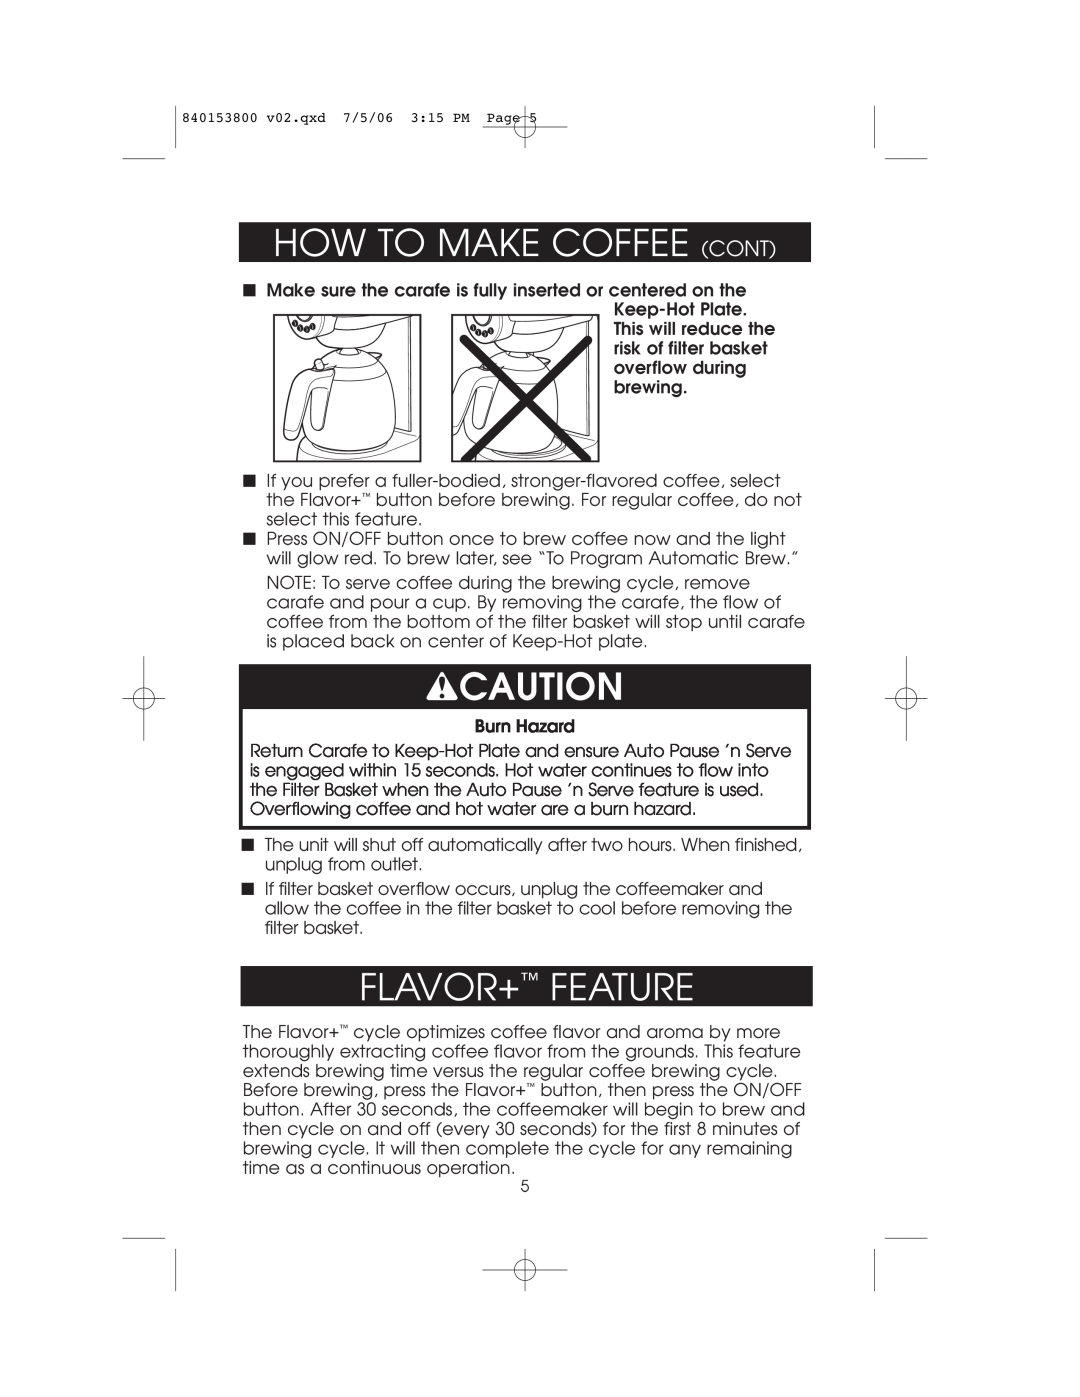 Hamilton Beach 840153800 owner manual How To Make Coffee Cont, wCAUTION, Flavor+ Feature 